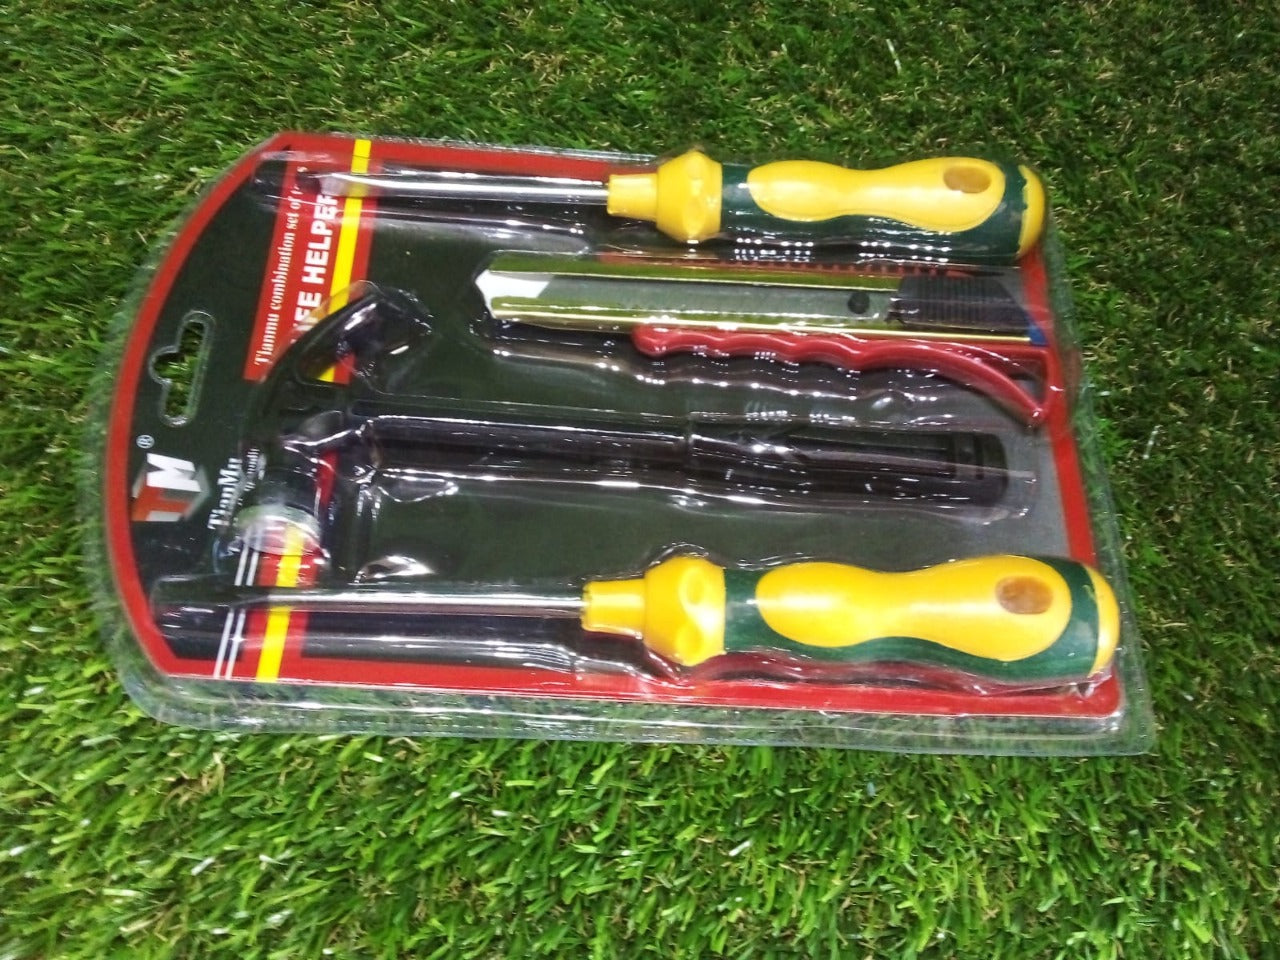 9029 4 Pc Helper Tool Set used while doing plumbing and electrician repairment in all kinds of places like household and official departments etc. 